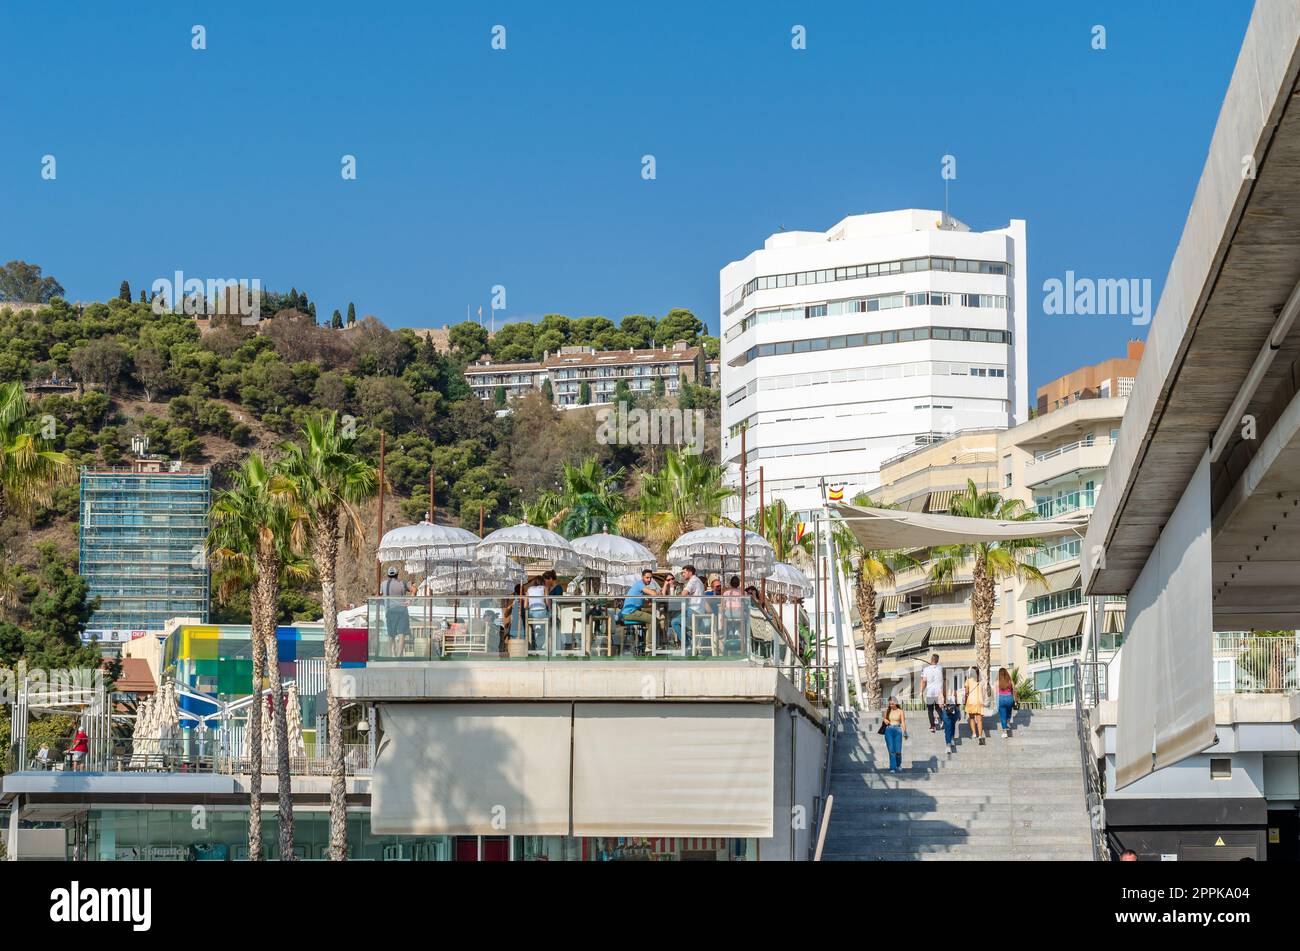 MALAGA, SPAIN - OCTOBER 12, 2021: 'Muelle Uno', an outdoor shopping area with a variety of modern shops and restaurants along the promenade in Malaga, Spain Stock Photo